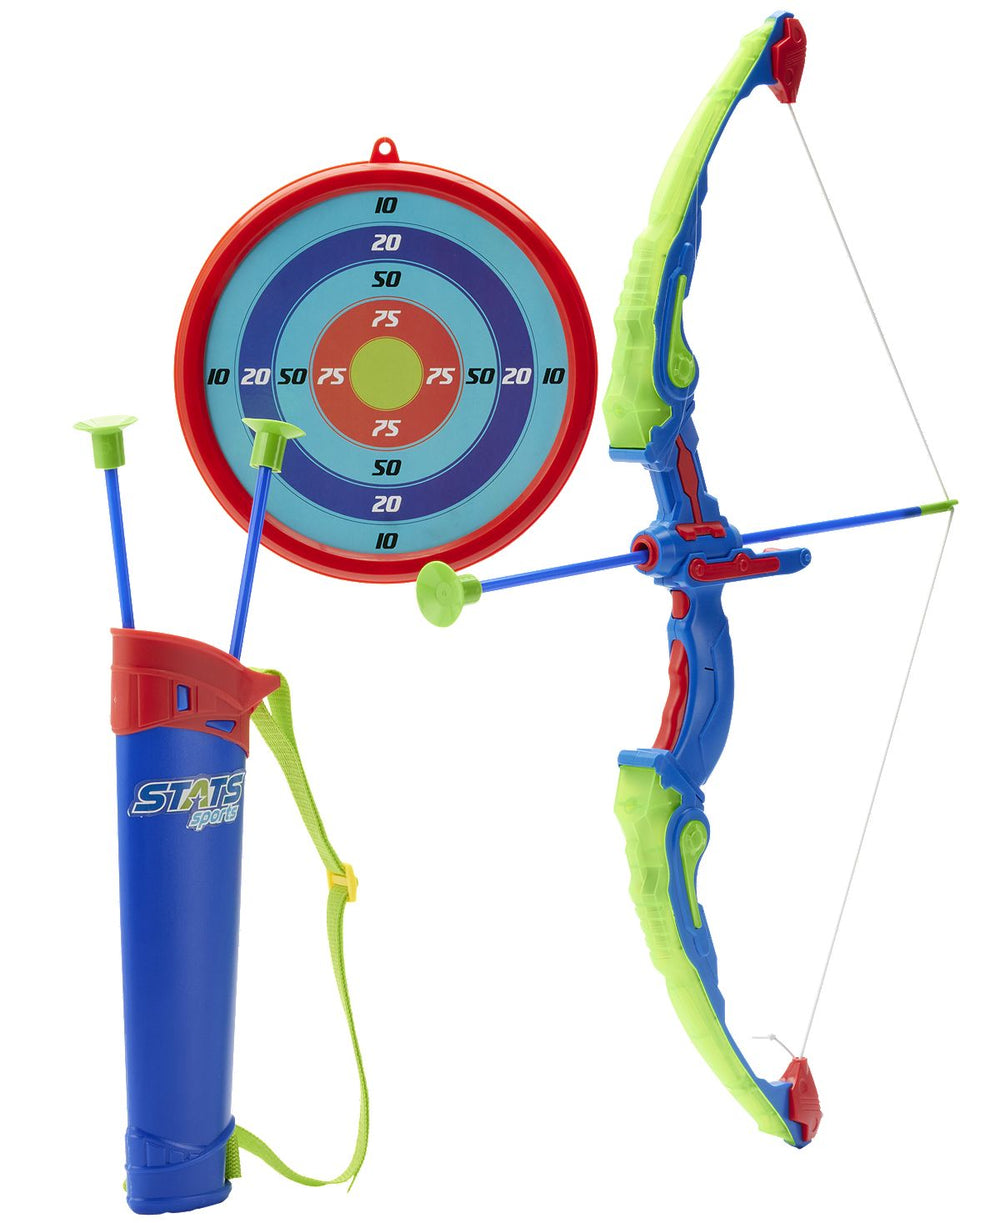 Stats Illuminated Archery Set for Kids with Target and Suction Cup Arrows